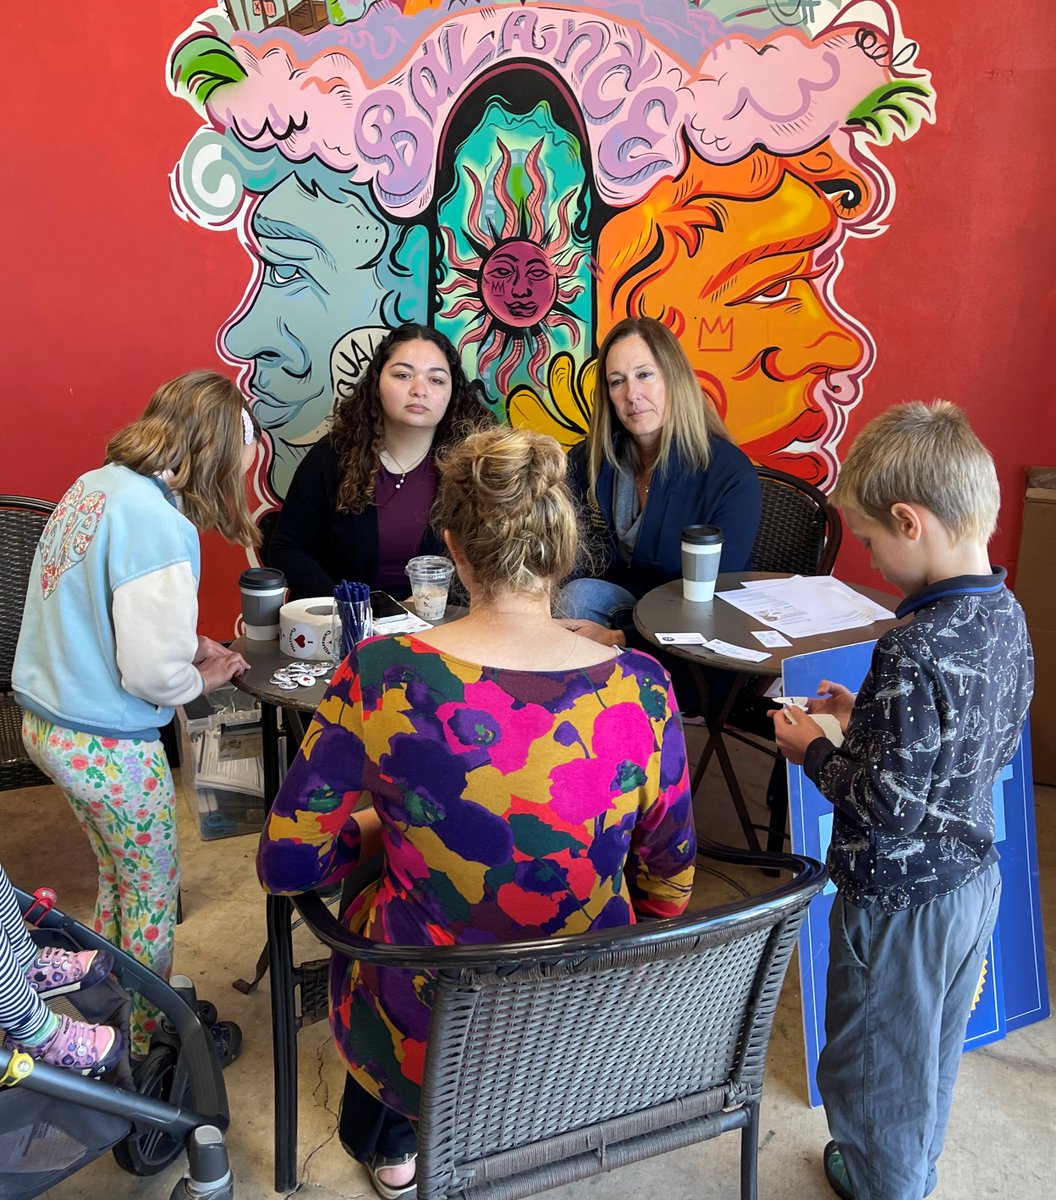 Another productive 'Sidewalk Session,' this time in @CityofCamarillo at Tree Lounge Coffee ☕. Thank you to all those who stopped by to share their thoughts and ideas. A special thanks to Camarillo Mayor Tony Trembley for spending time addressing city issues. #AD42